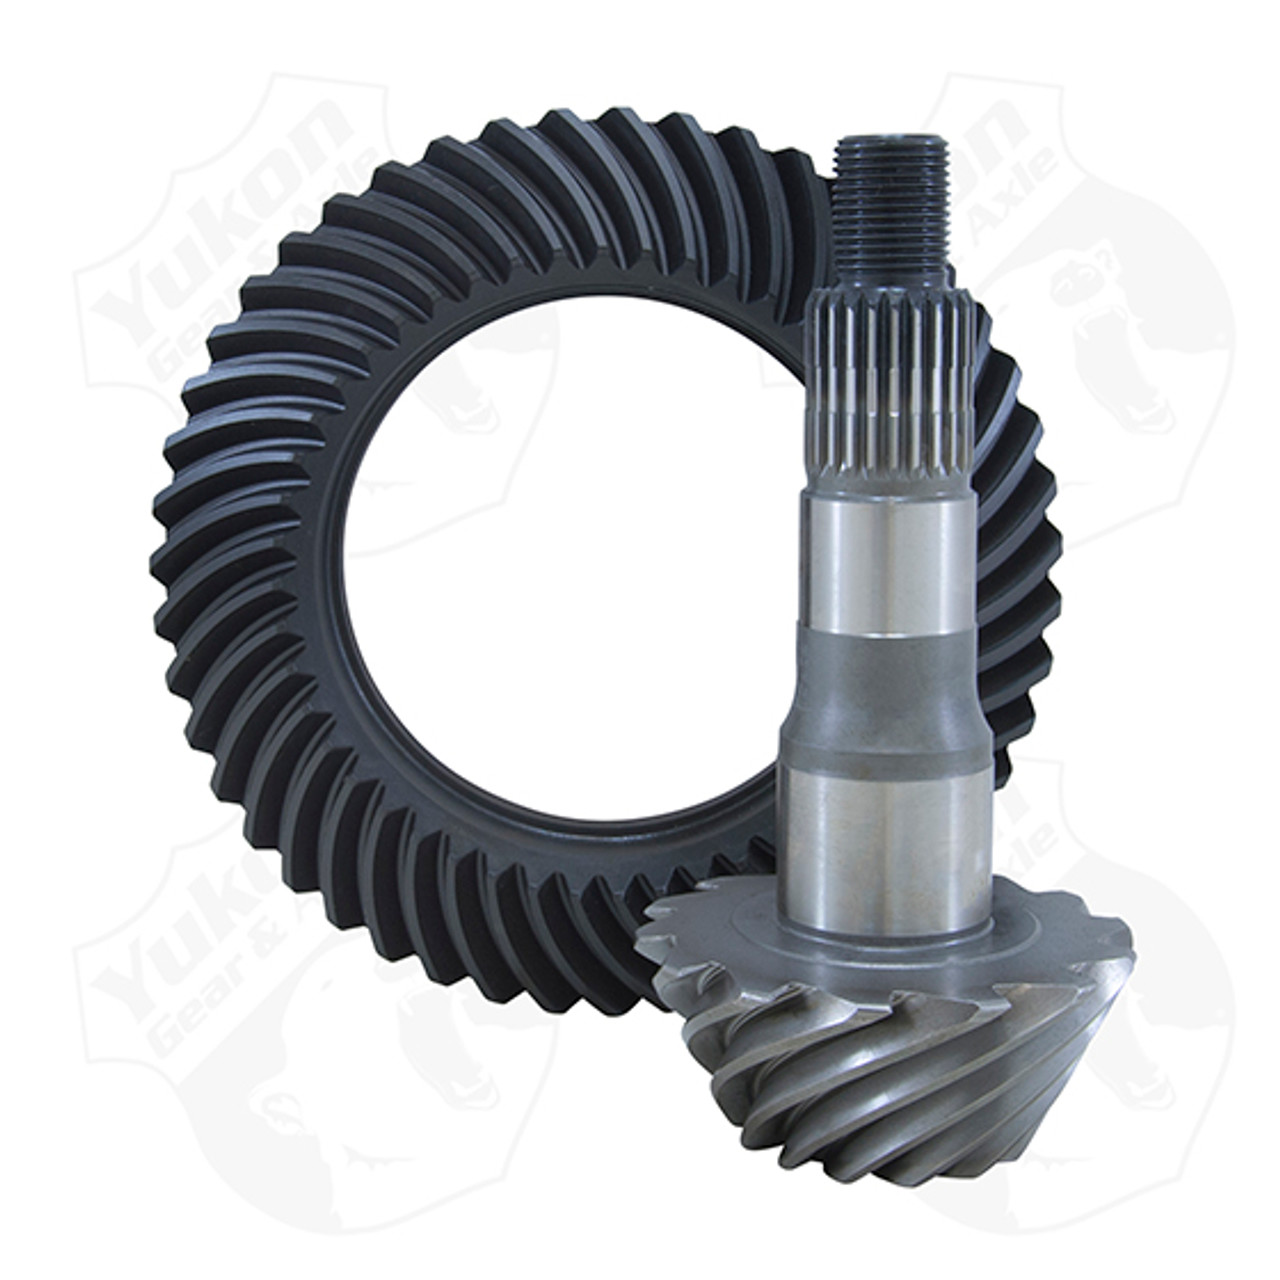 Yukon Ring & Pinion Gear Set for 2004 & up Nissan M205 front, 4.11 ratio.